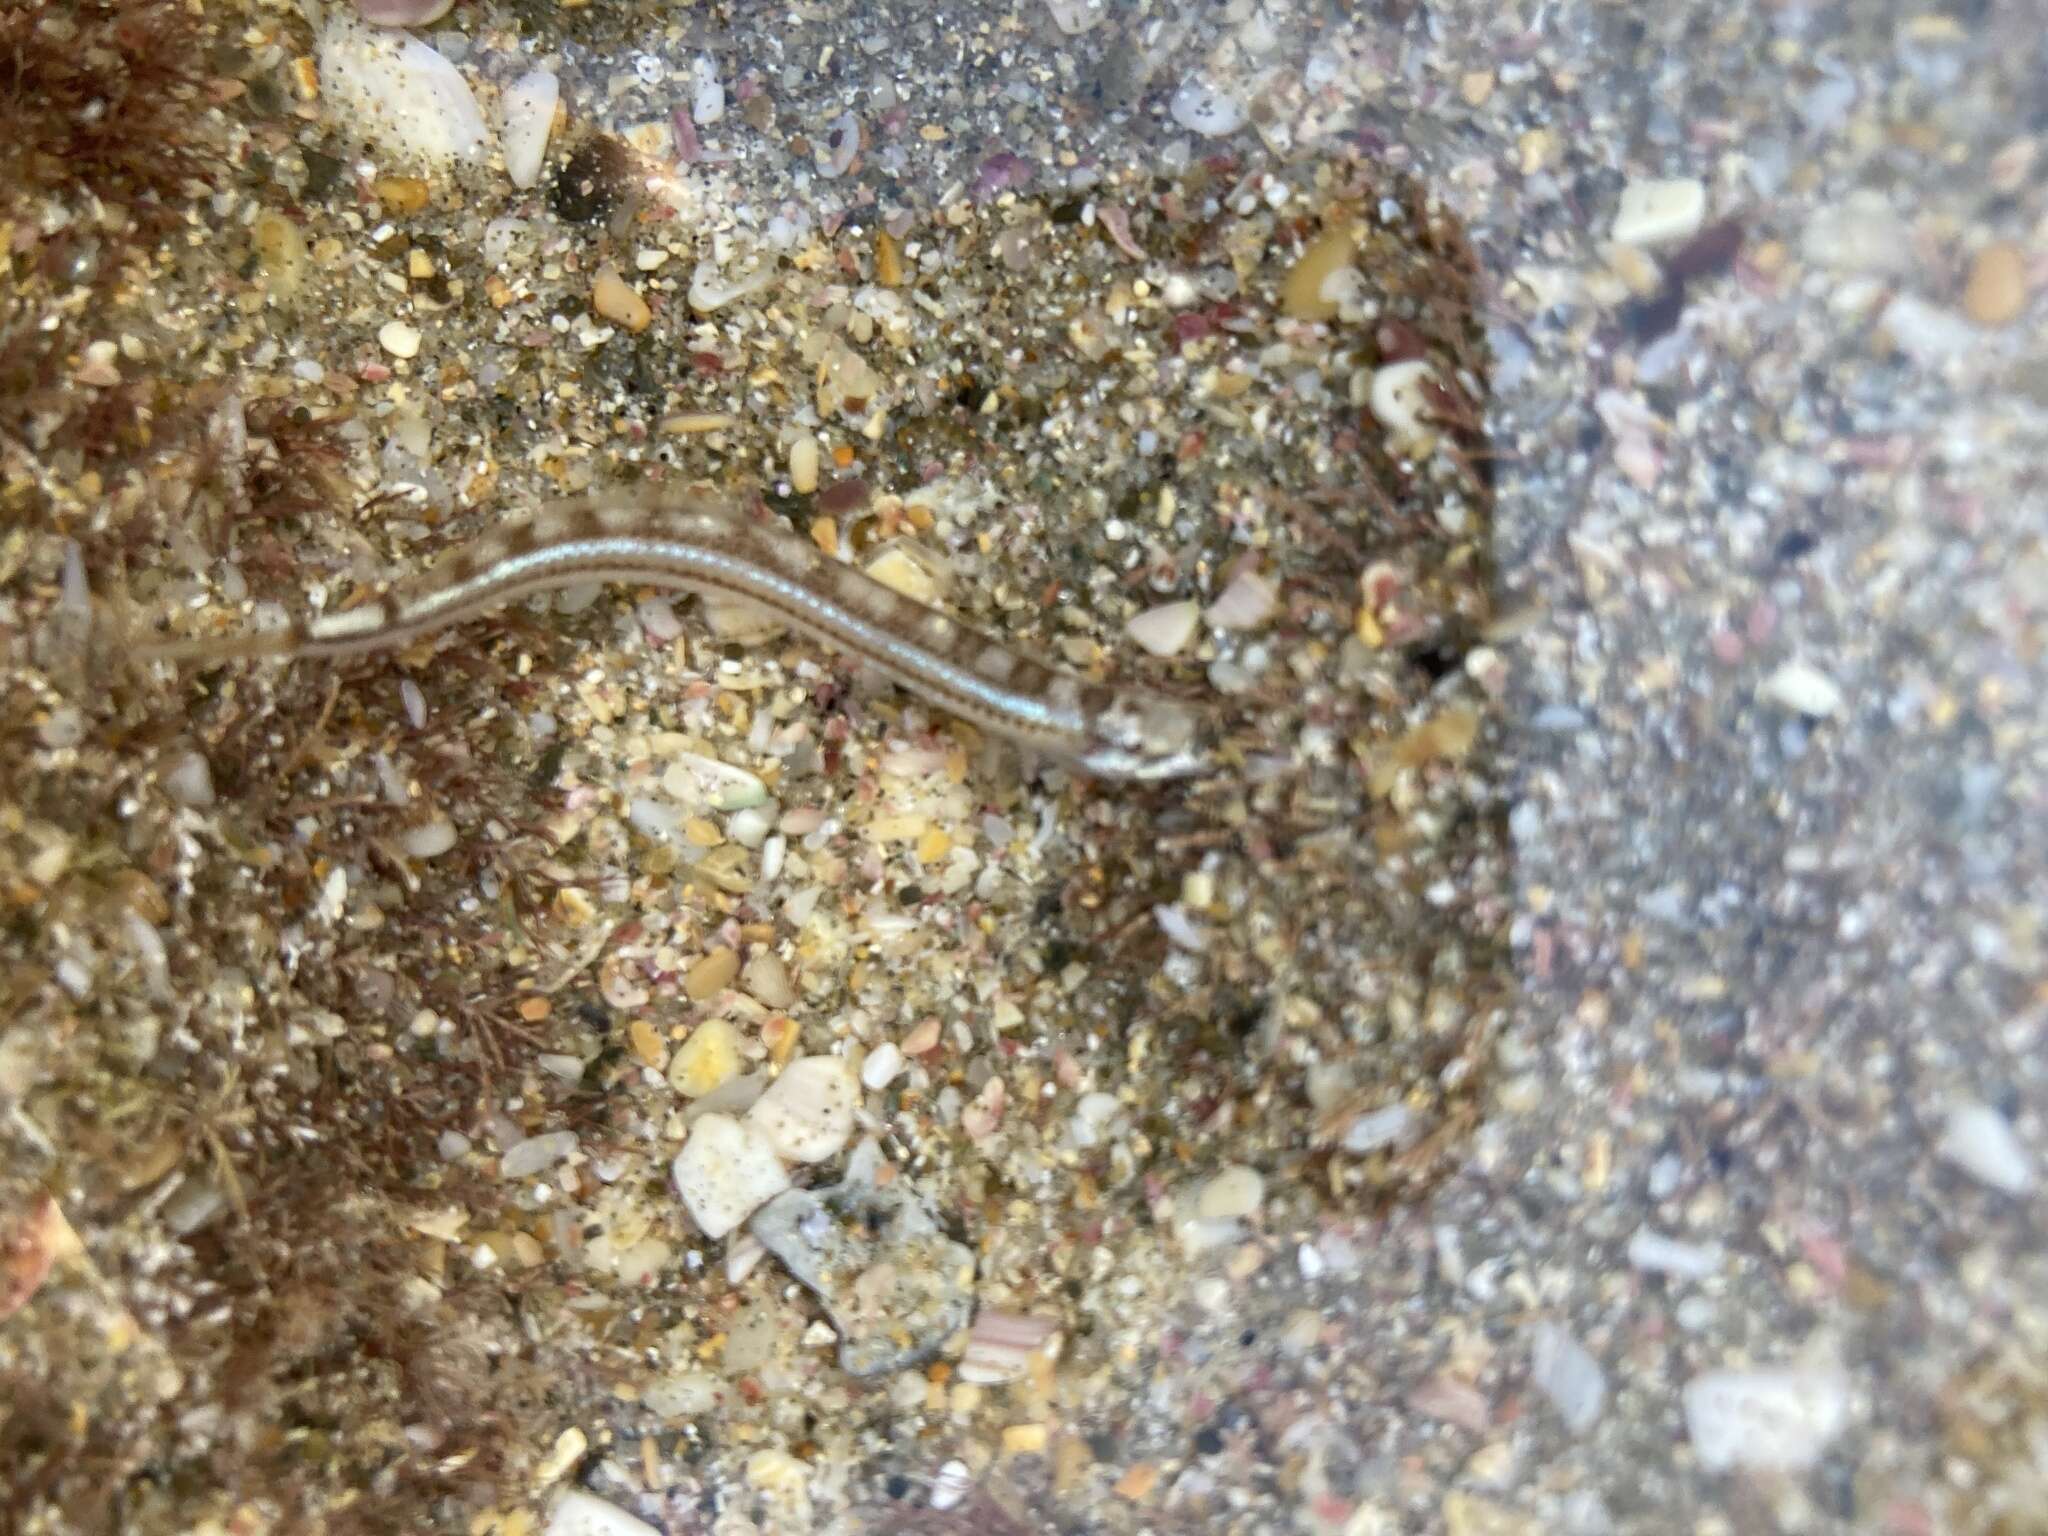 Image of Sand diver